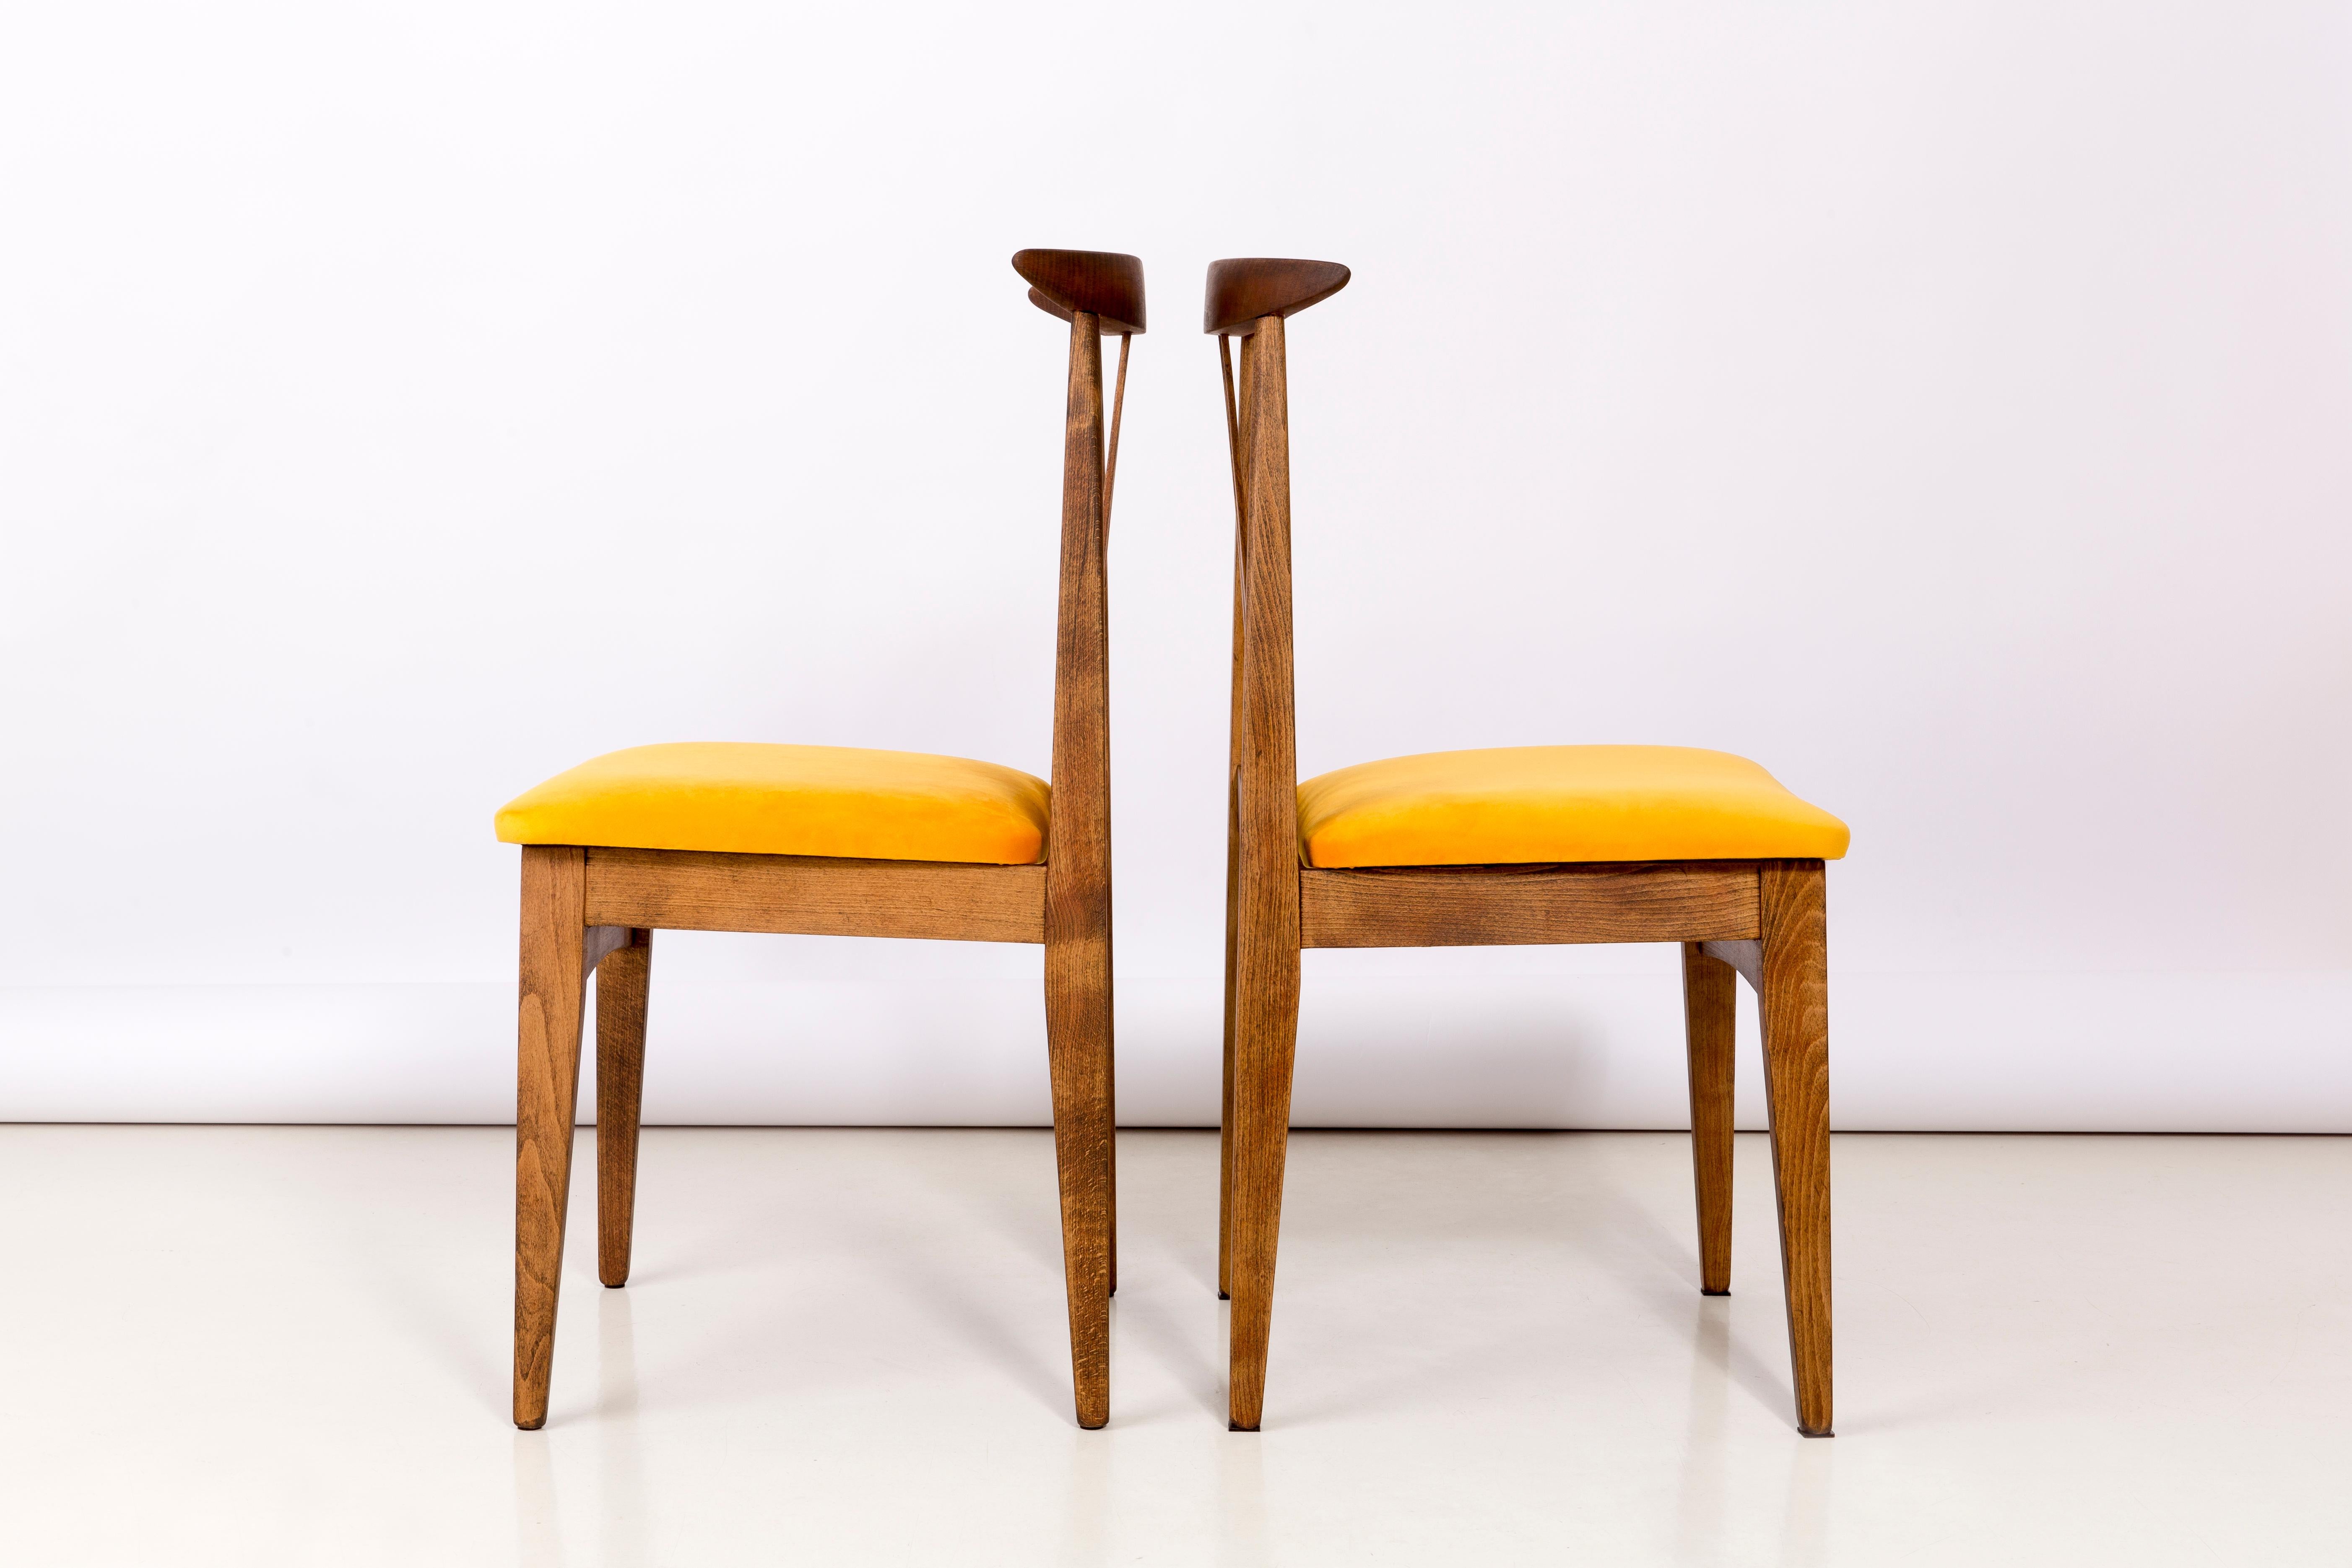 Hand-Crafted Set of Twelve Yellow Chairs, by Zielinski, Europe, 1960s For Sale